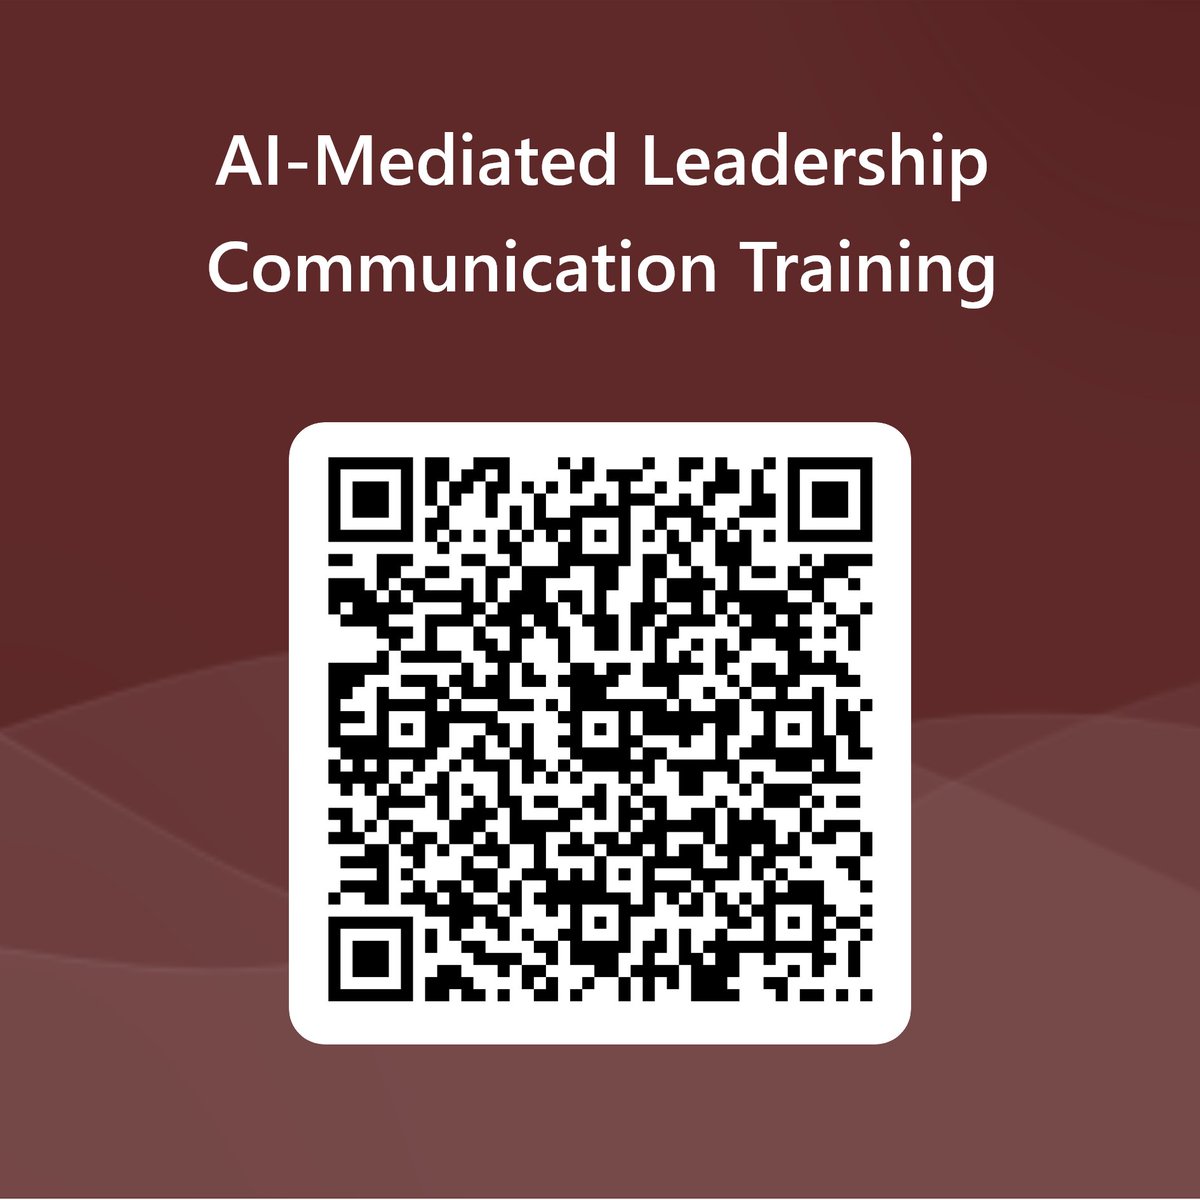 Study Alert! 🚨
Are you a manager or supervisor looking to enhance your communication skills? Join our study at Virginia Tech! Our study investigates AI-mediated training systems for effective workplace communication (VT IRB#23-1358). See comments for a link or scan the QR!
[1/2]